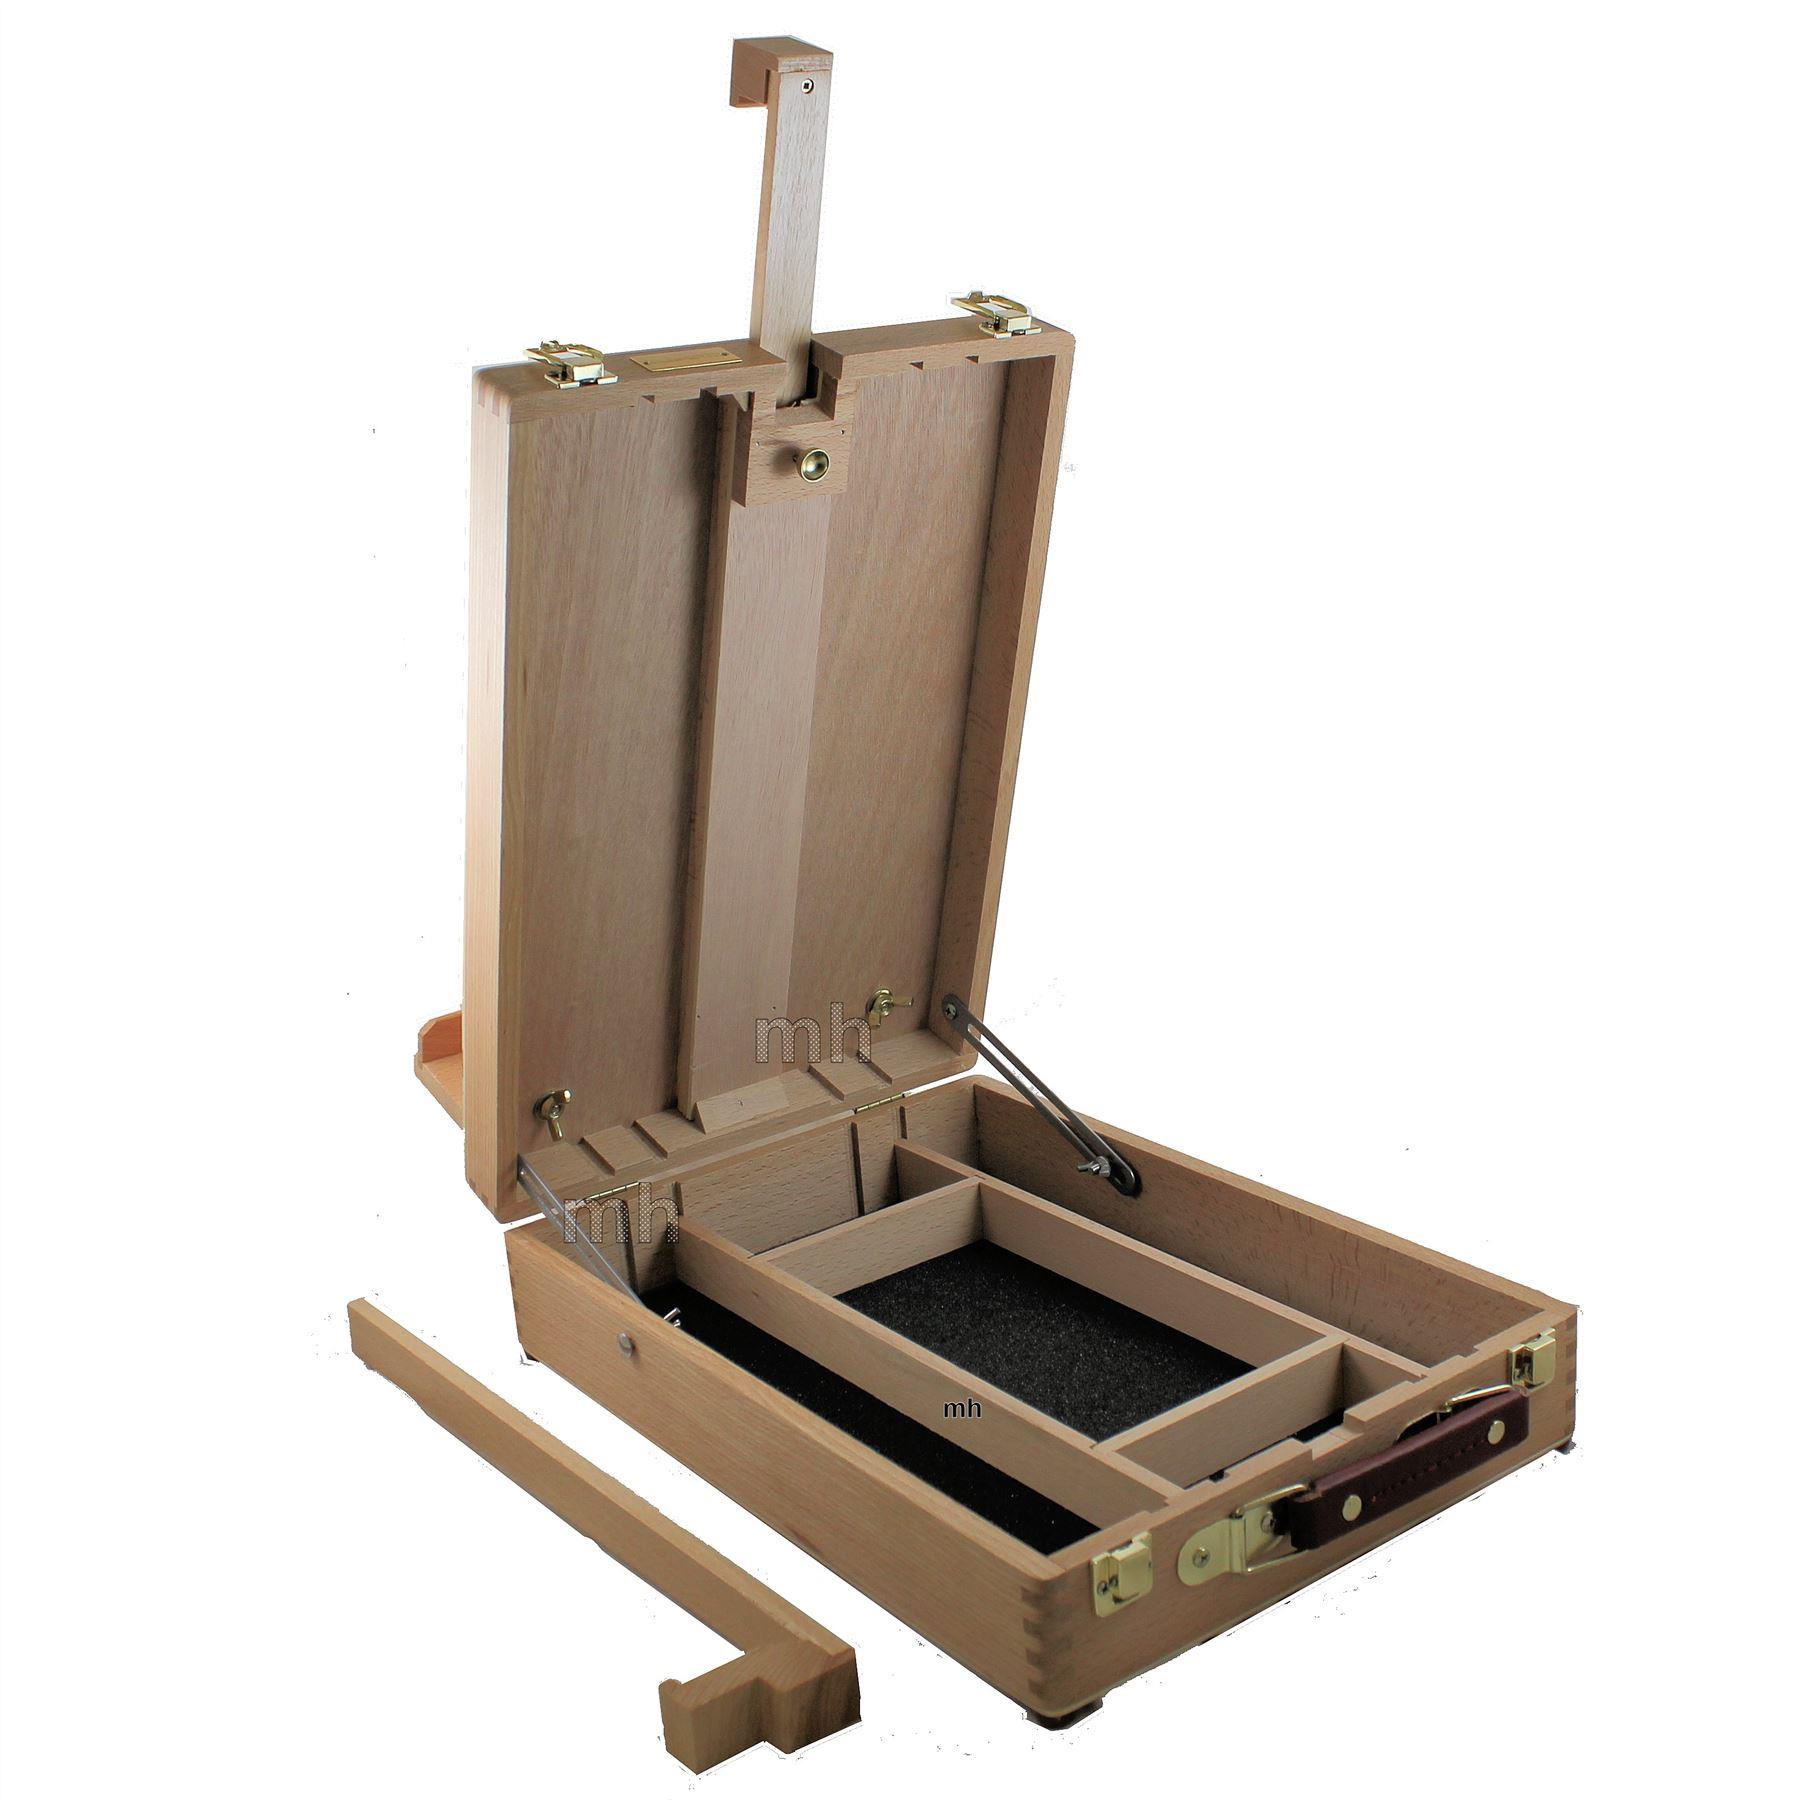 Daler Rowney artists Edinburgh Wooden Box Table Easel and storage